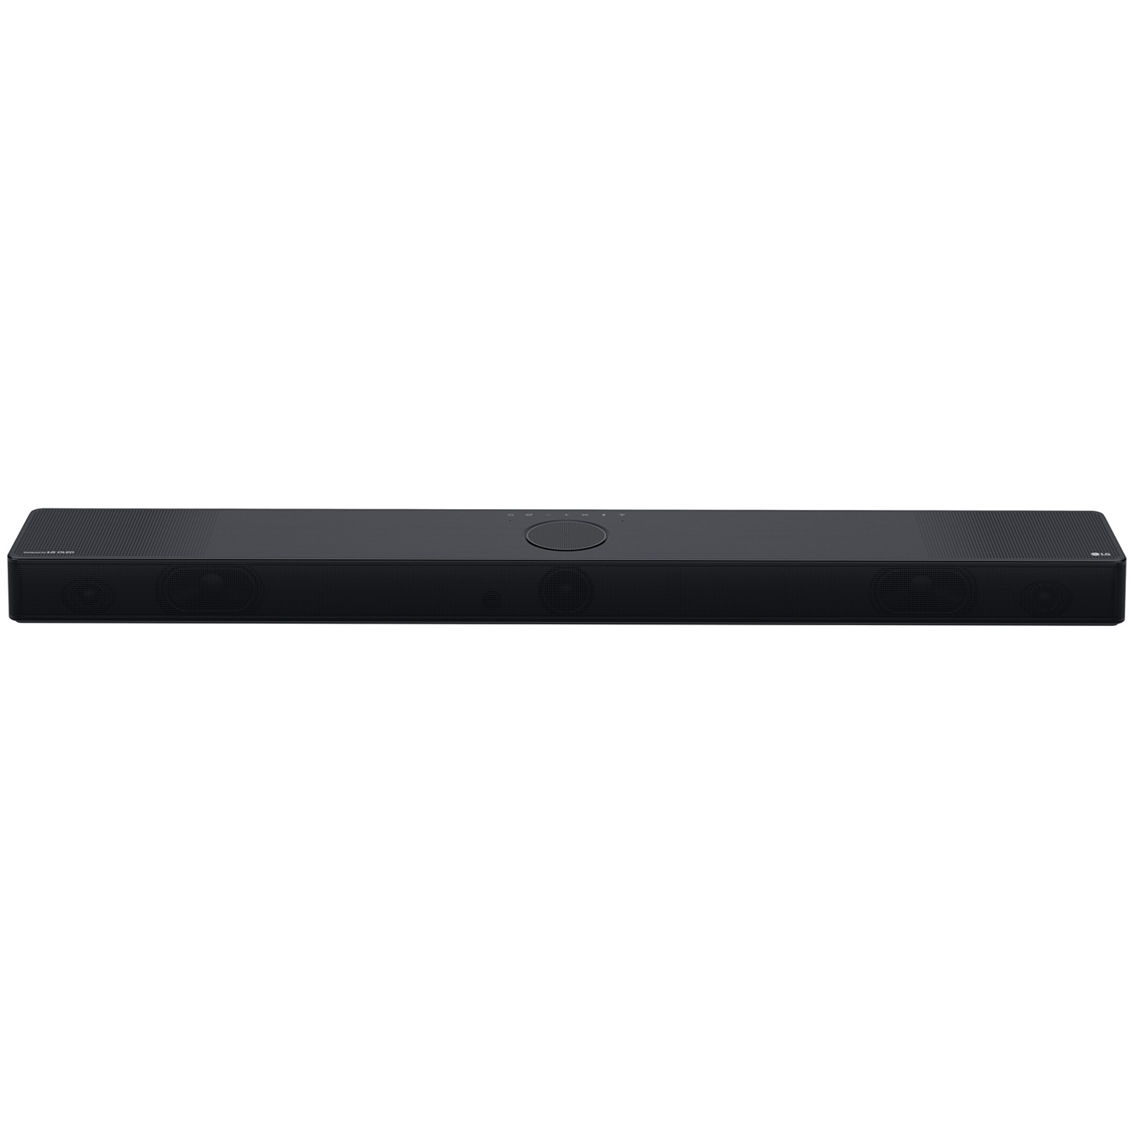 LG SC9S 3.1.3 Channel 400W OLED C2/C3 Series Matching Sound Bar with Dolby Atmos - Image 3 of 7